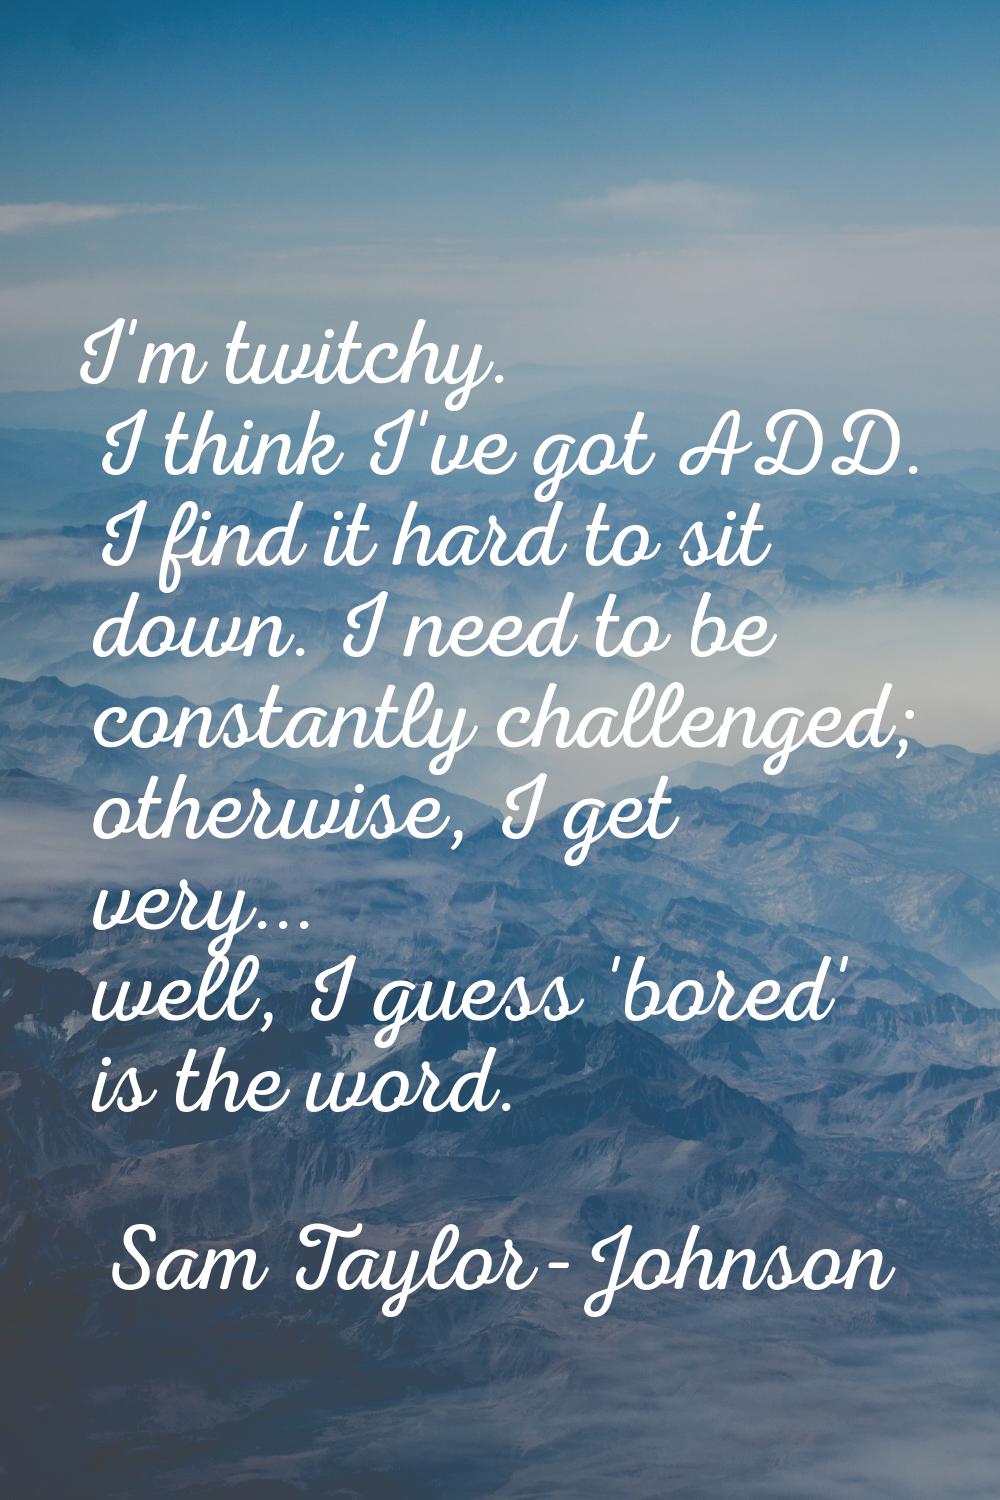 I'm twitchy. I think I've got ADD. I find it hard to sit down. I need to be constantly challenged; 